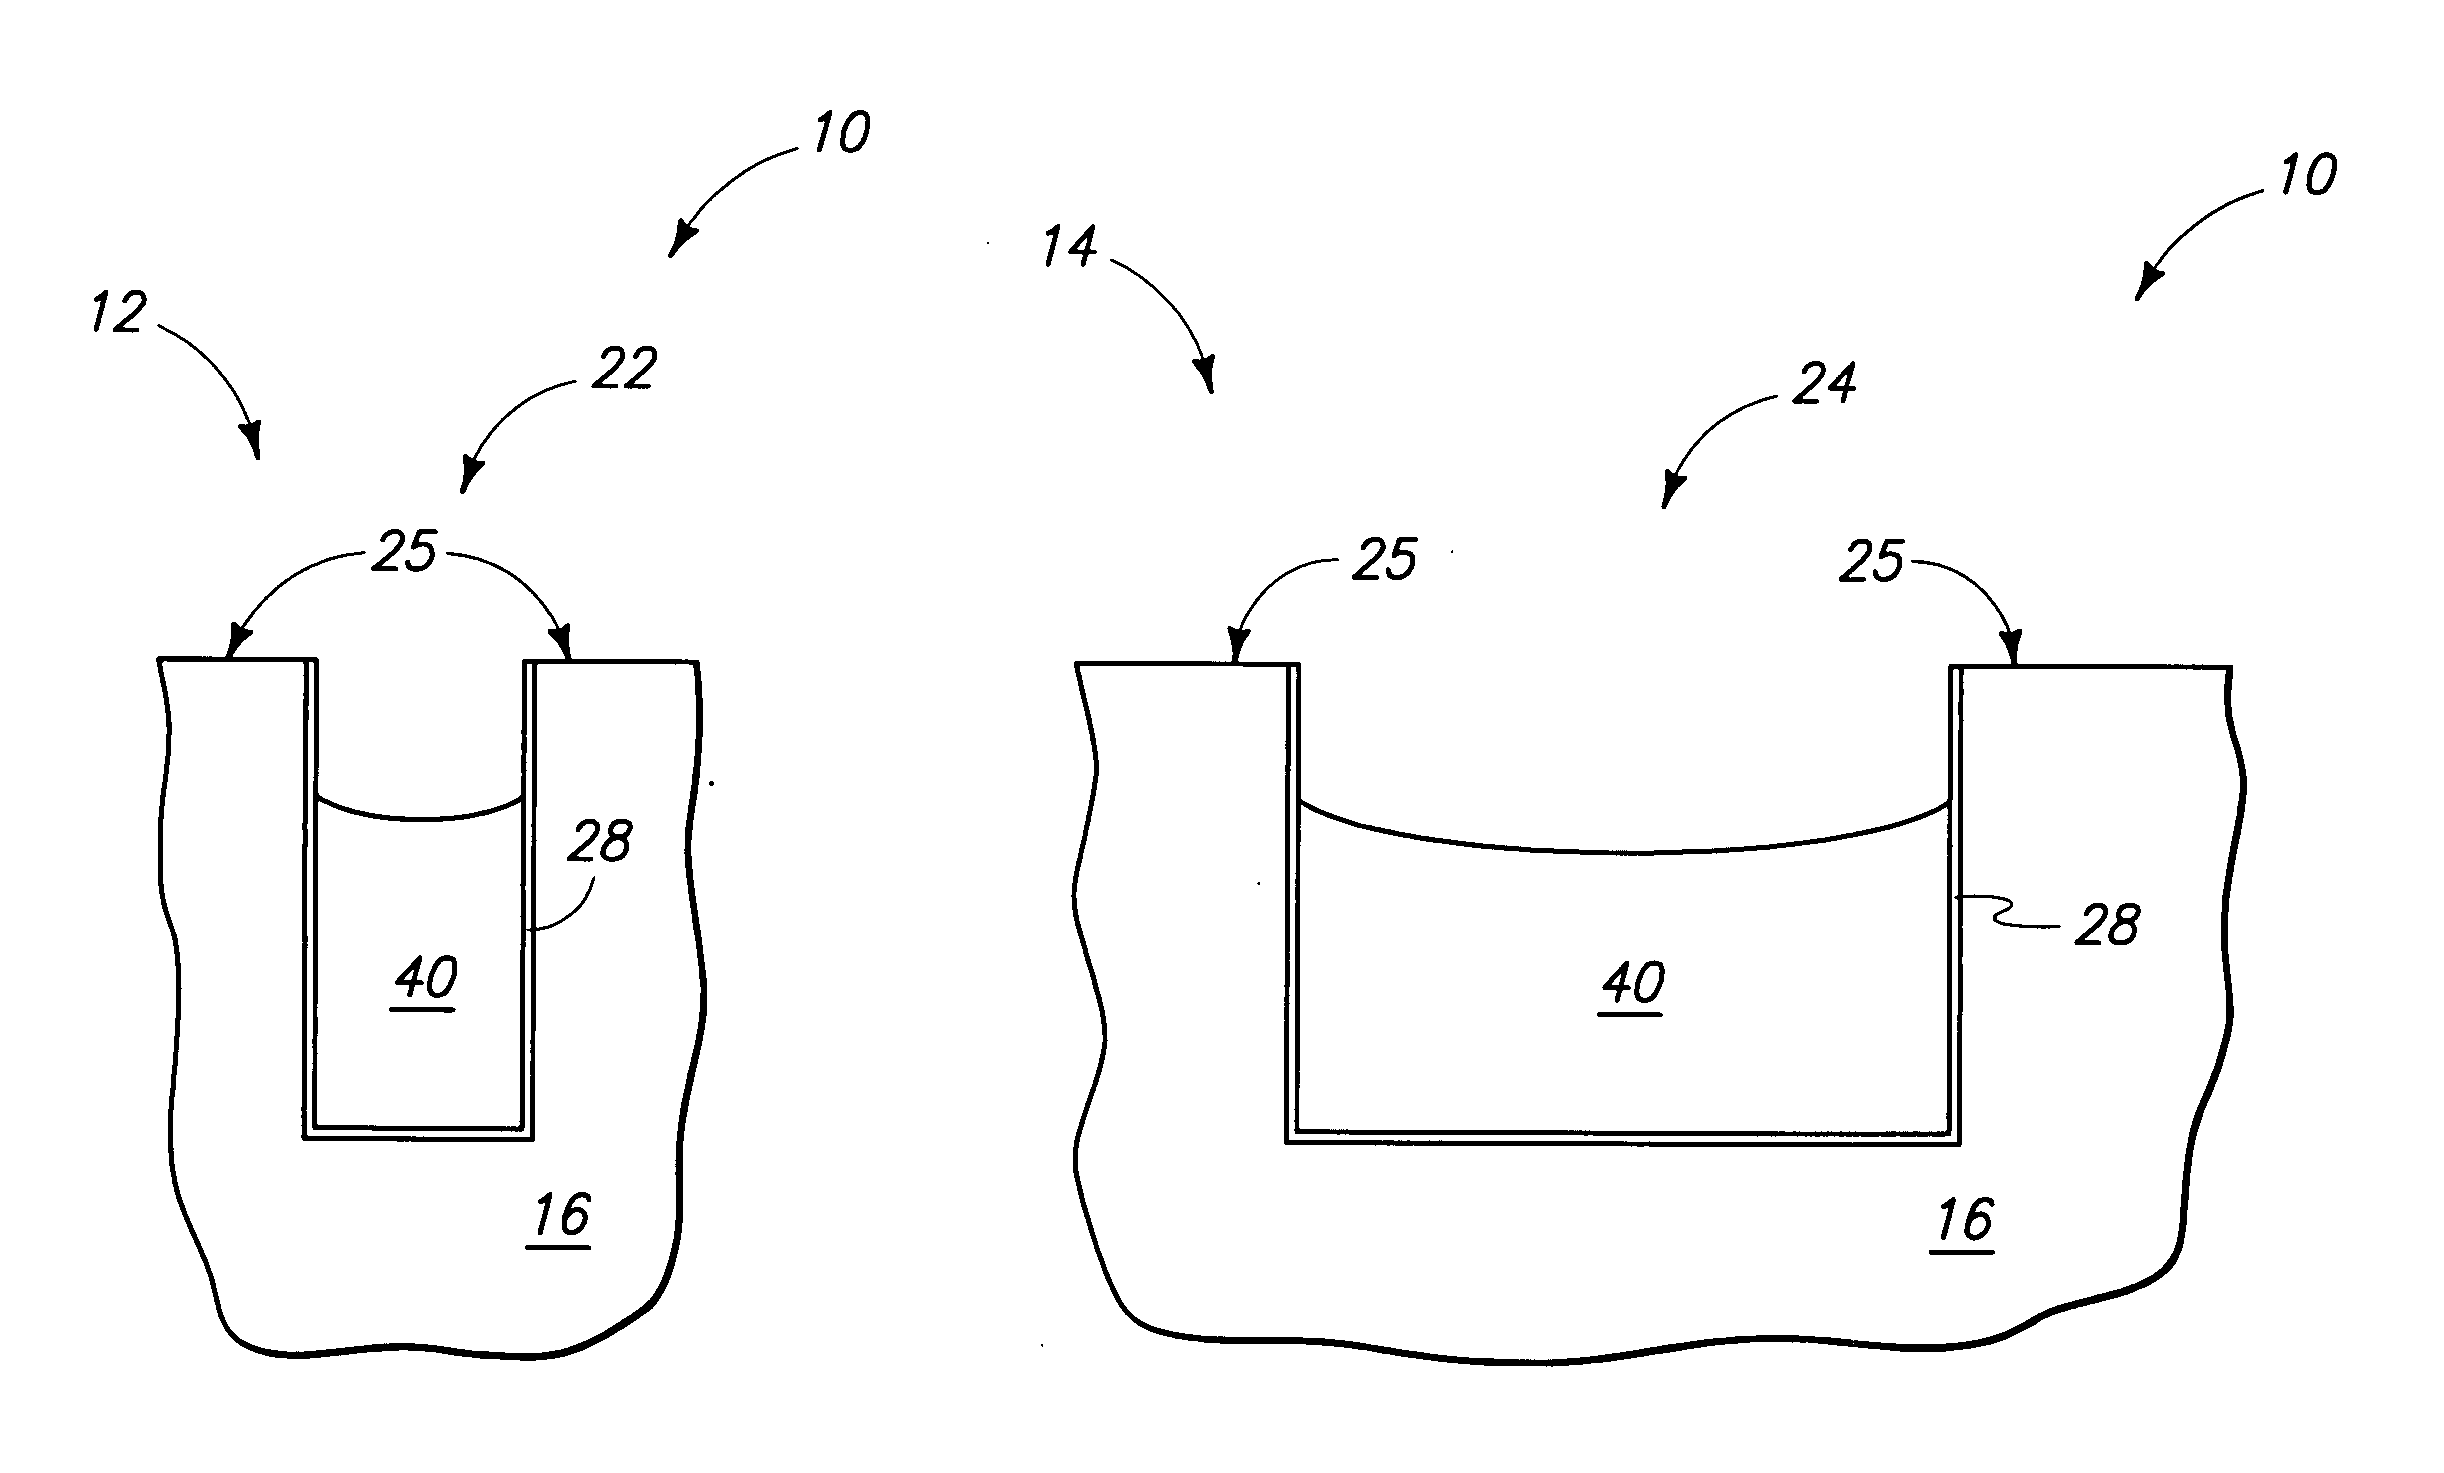 Methods of forming trench isolation in the fabrication of integrated circuitry and methods of fabricating integrated circuitry